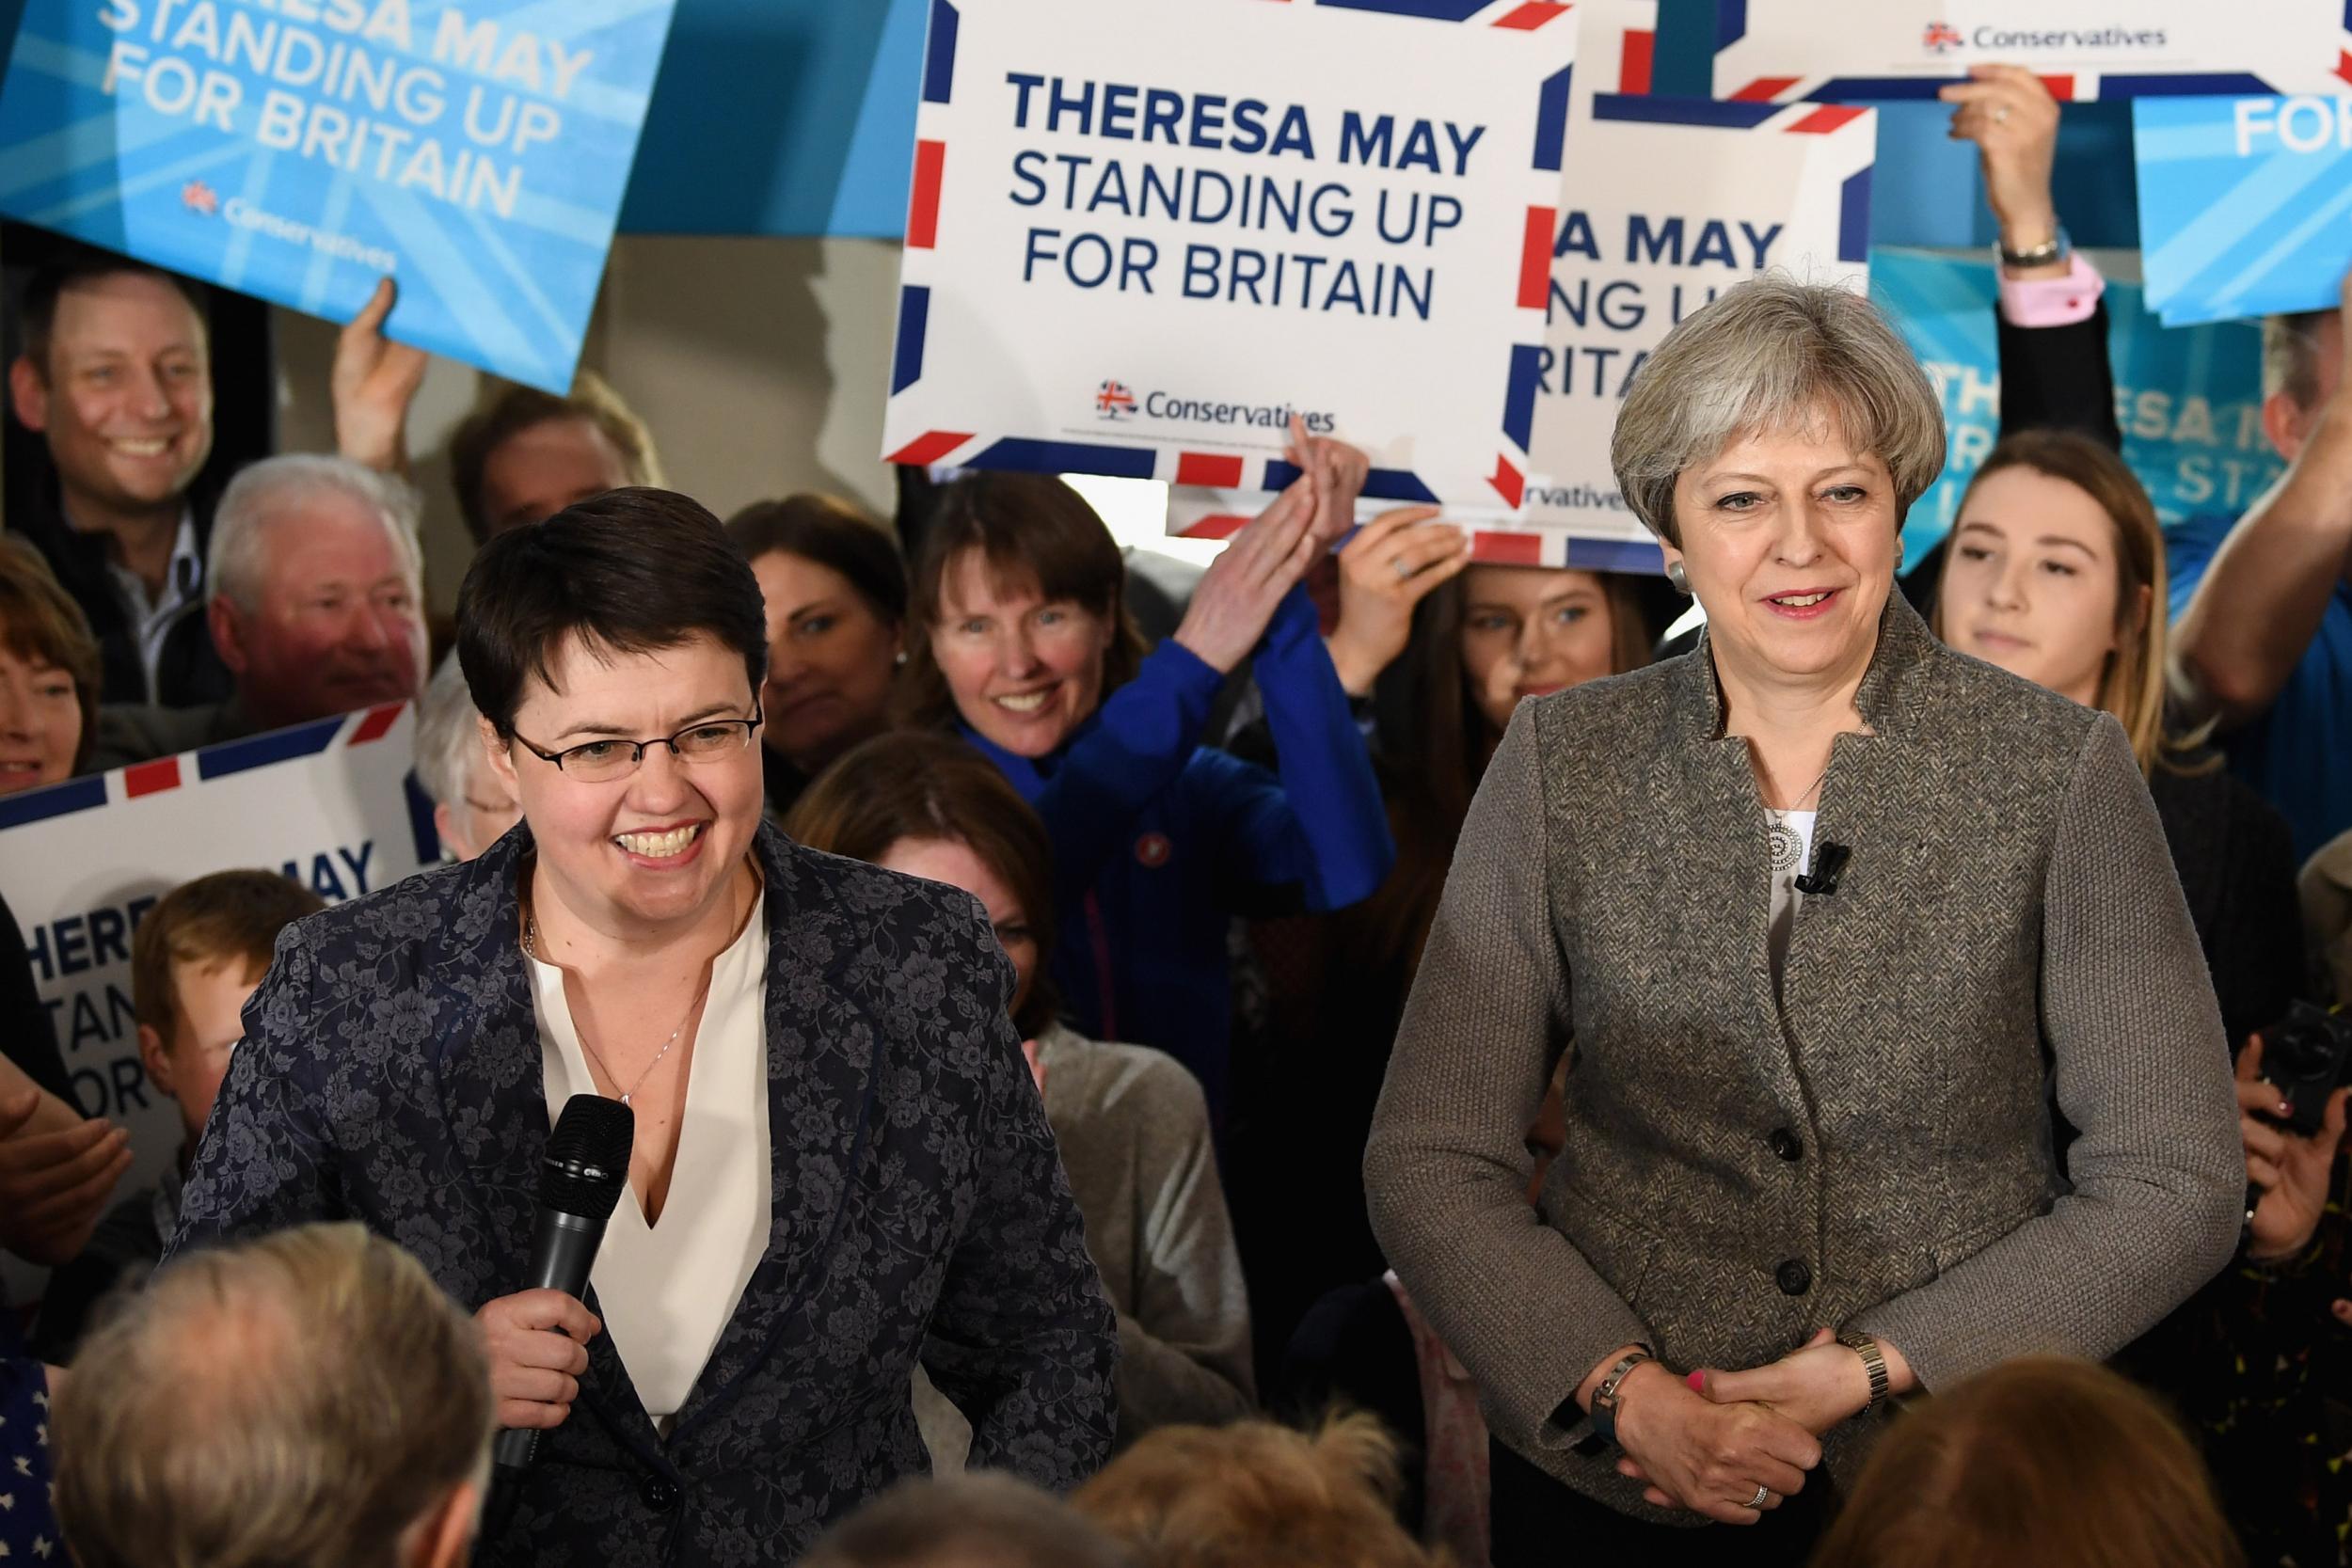 Ms Davidson and Ms May campaign together to urge Scottish people to vote Tory